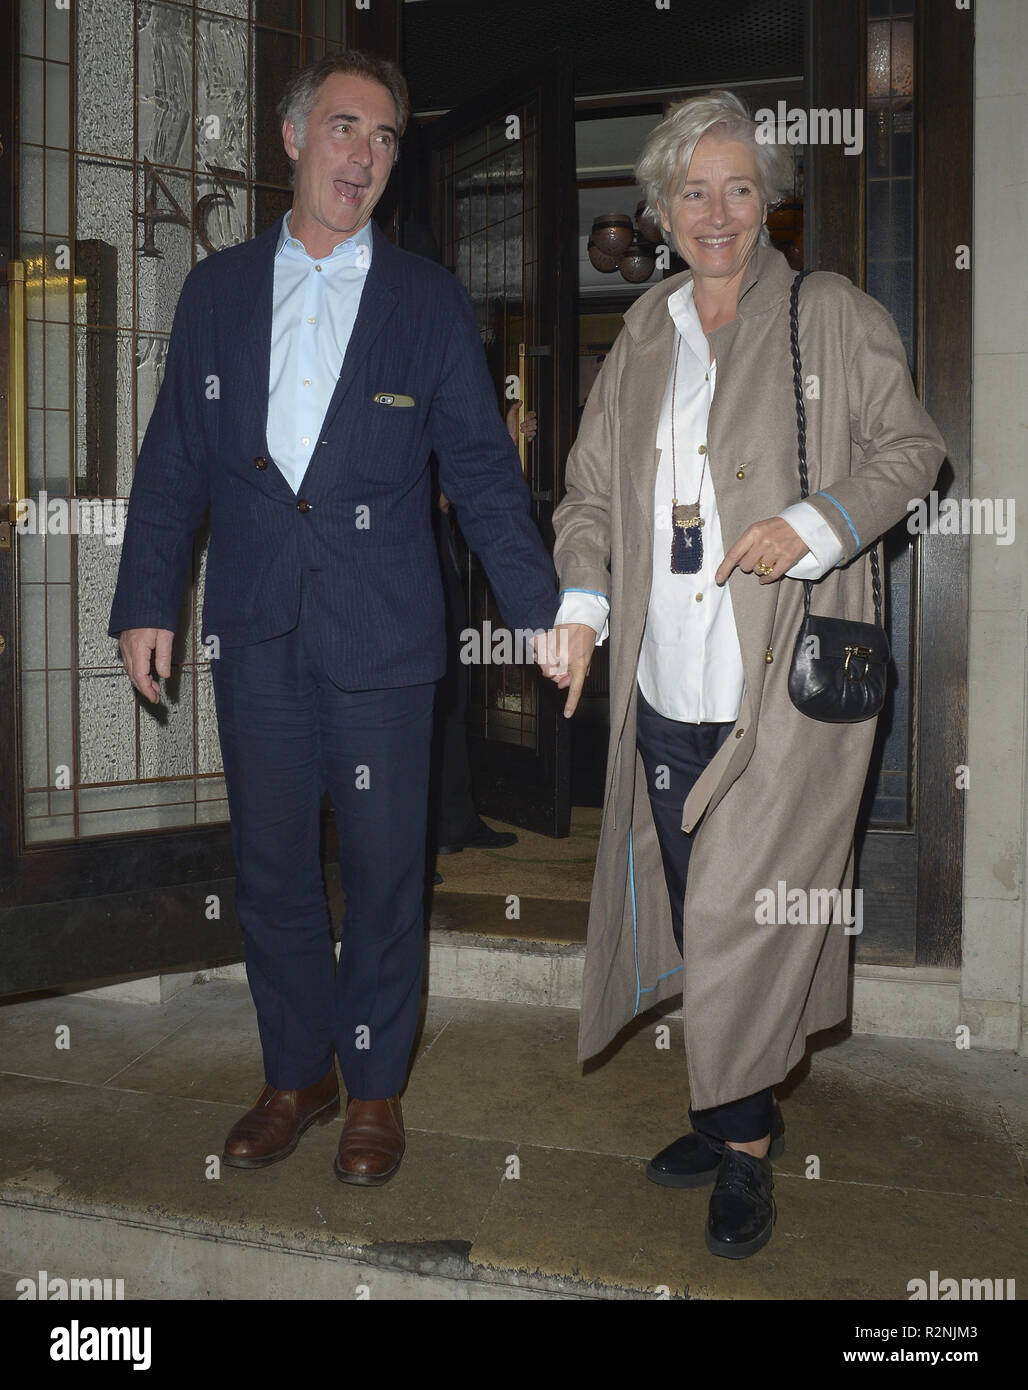 Emma Thompson and her husband Greg Wise leave 34 Mayfair restaurant  Featuring: Emma Thompson, Greg Wise Where: London, United Kingdom When: 20 Oct 2018 Credit: WENN.com Stock Photo